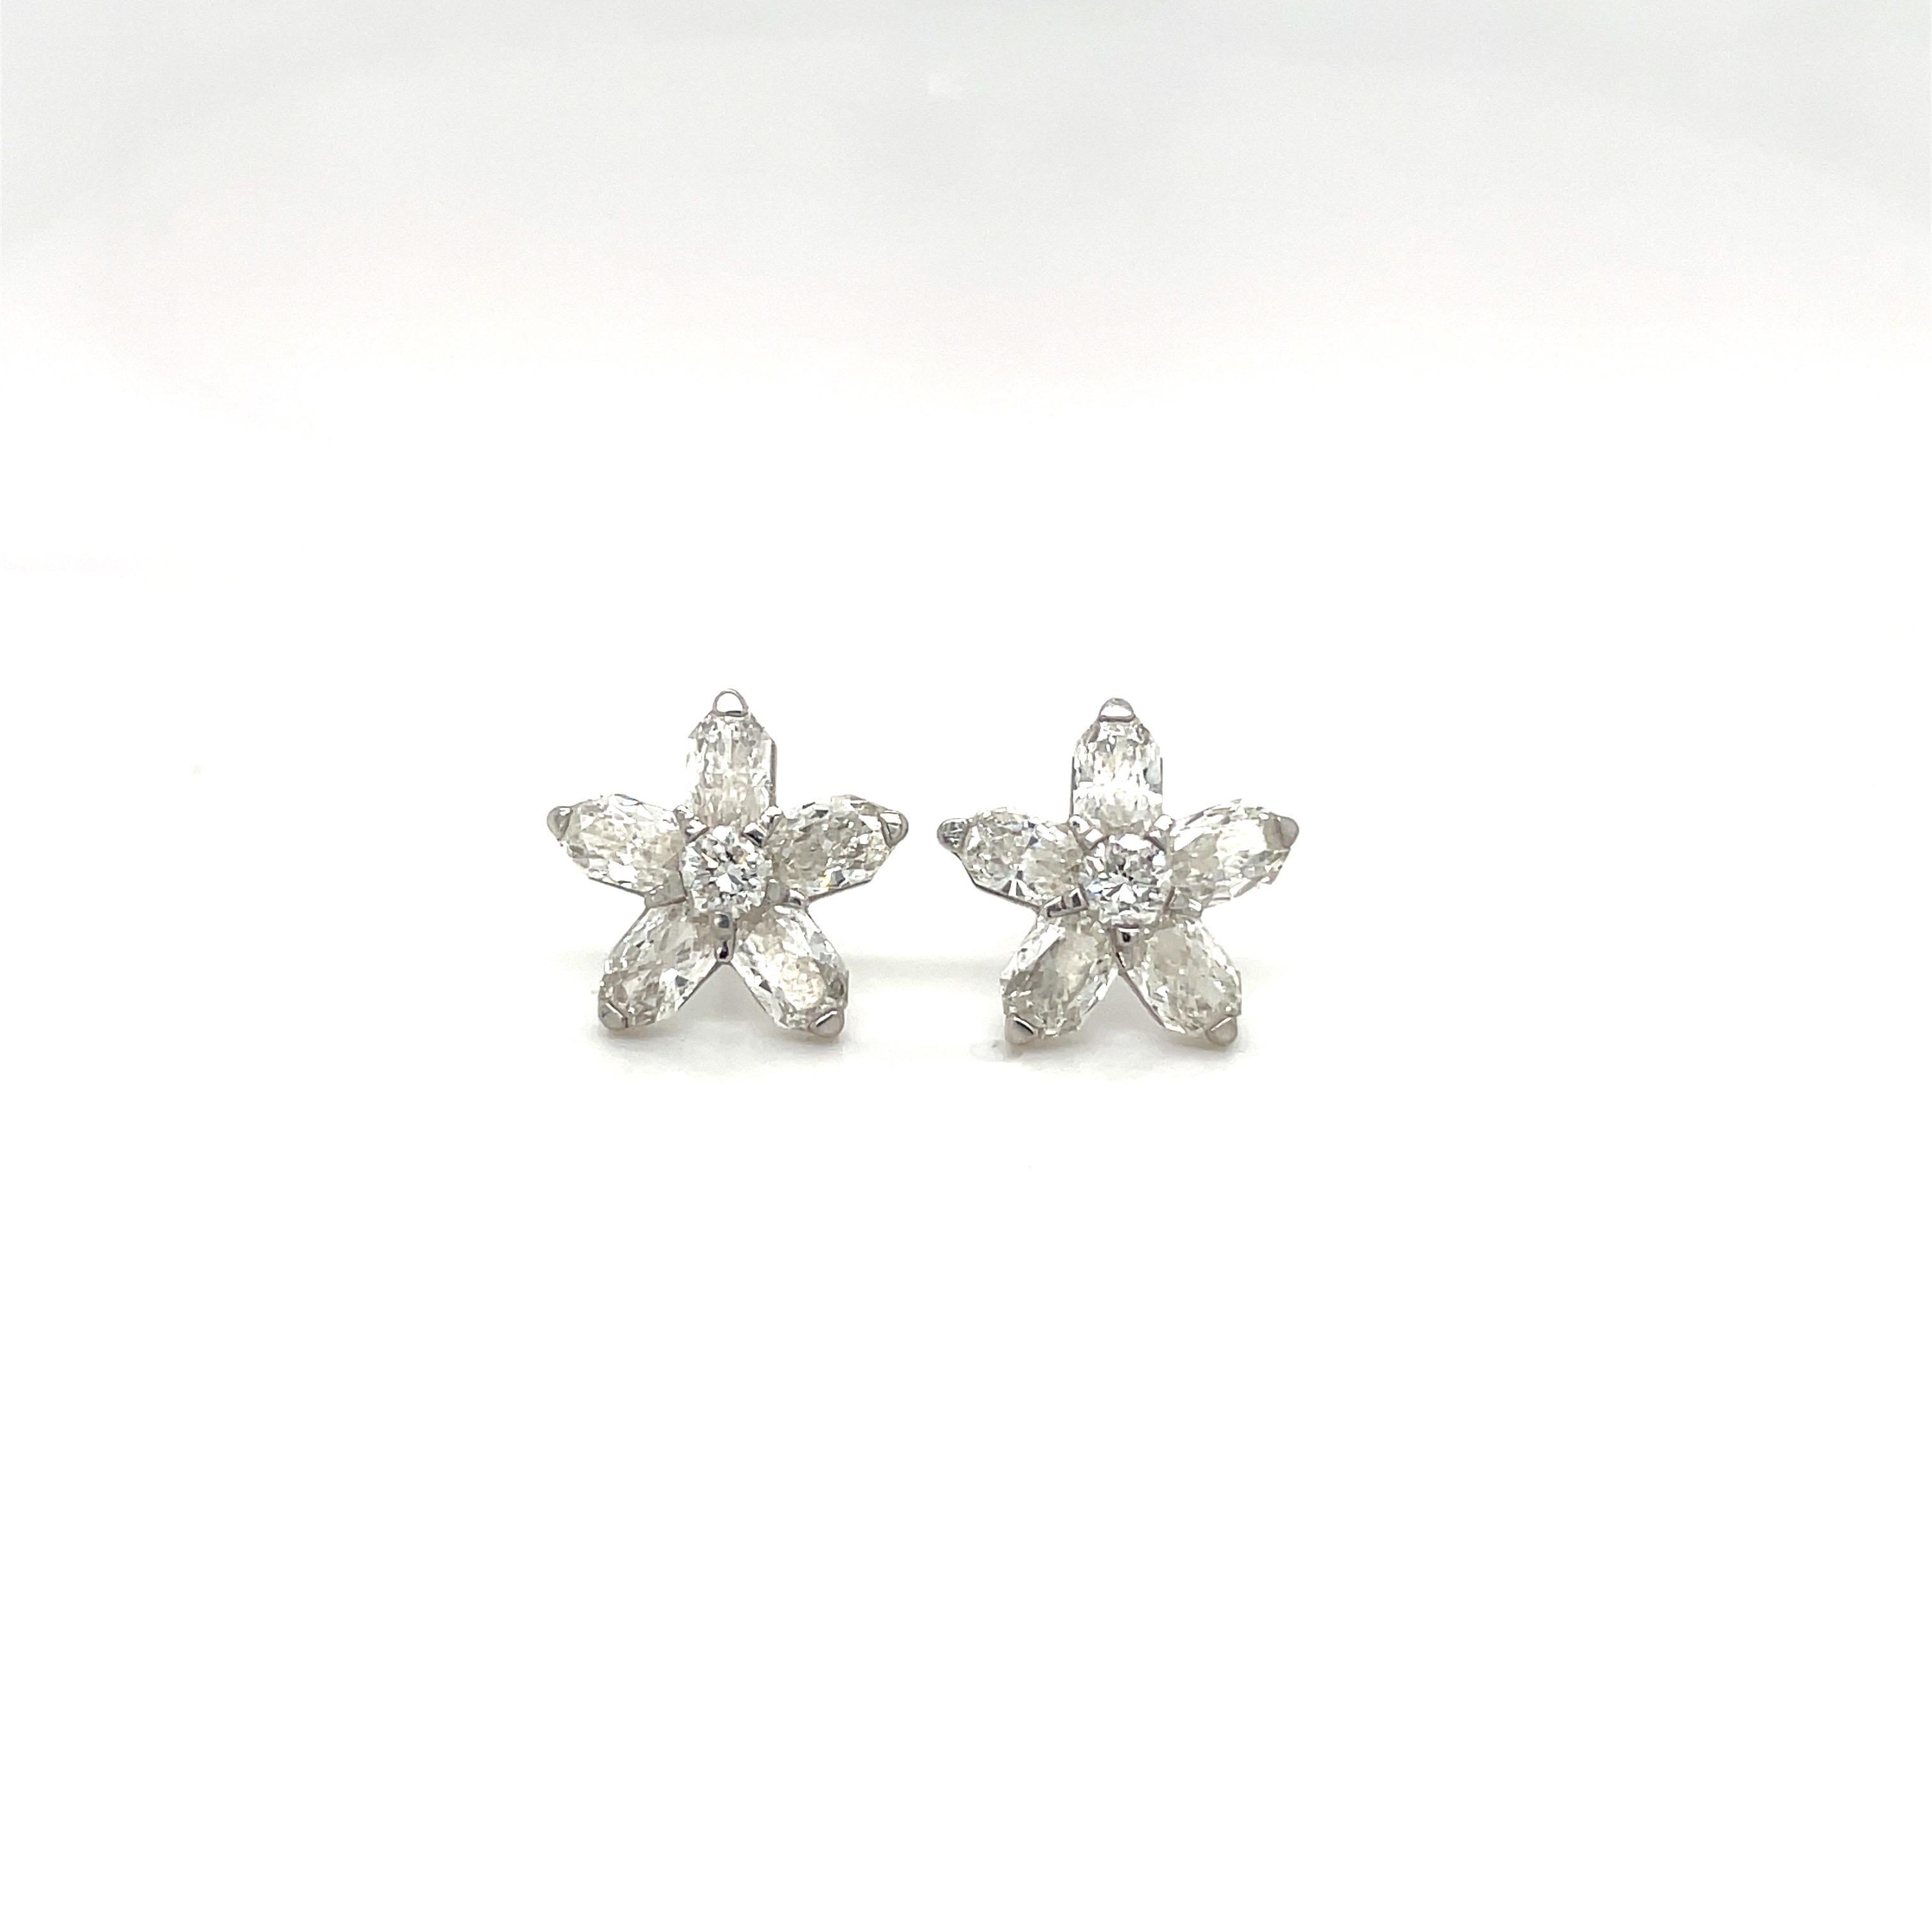 Feminine and elegant is the best way to describe these diamond flower stud earrings. The flower is composed of 5 fancy cut  diamond petals and 1 round brilliant diamond in the center .  They are set in  18 karat white gold, with post backs.
12 